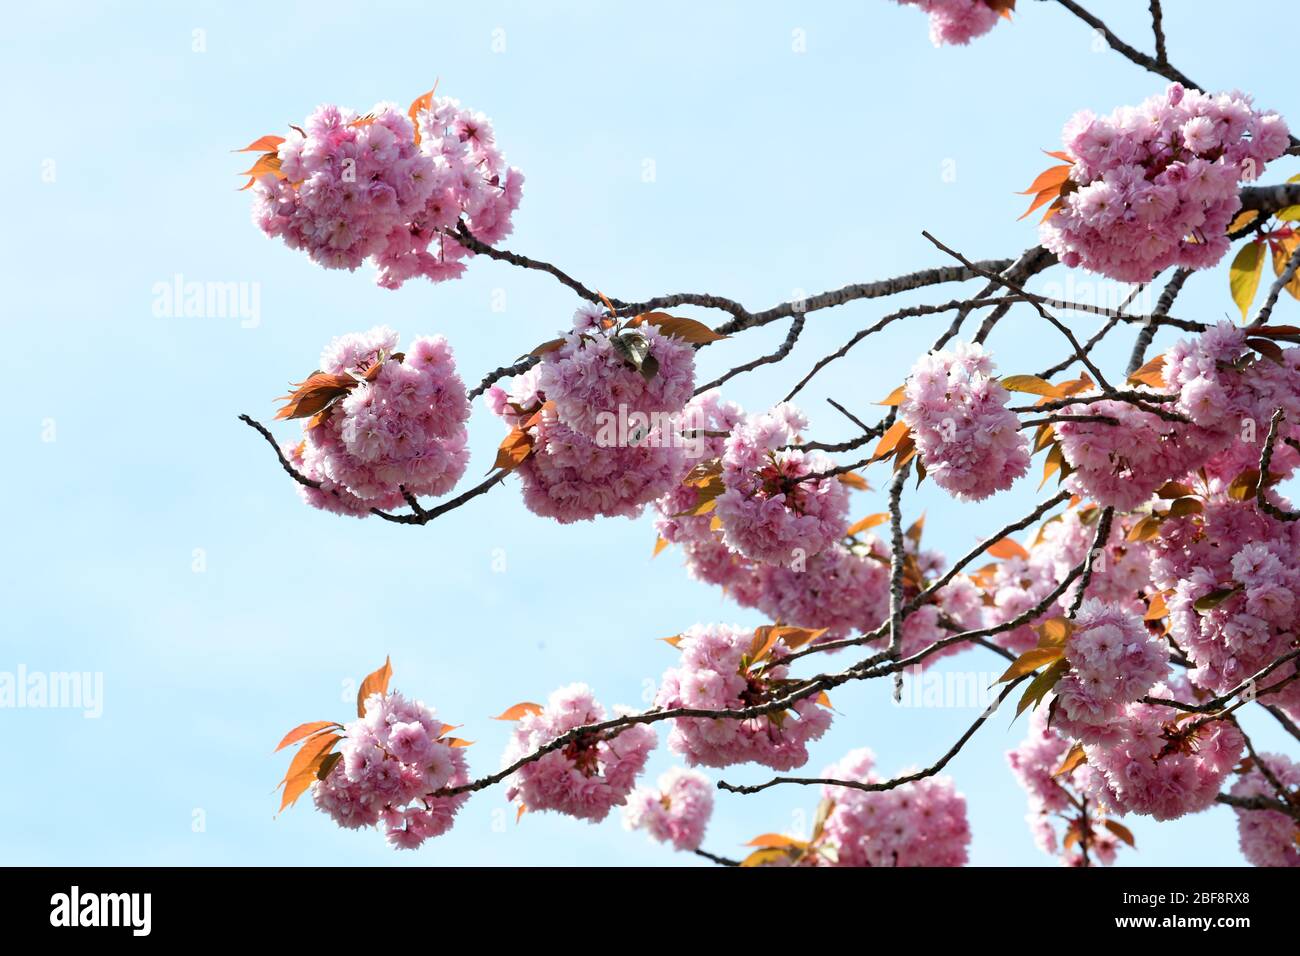 Pink Cherry blossom in bloom Stock Photo